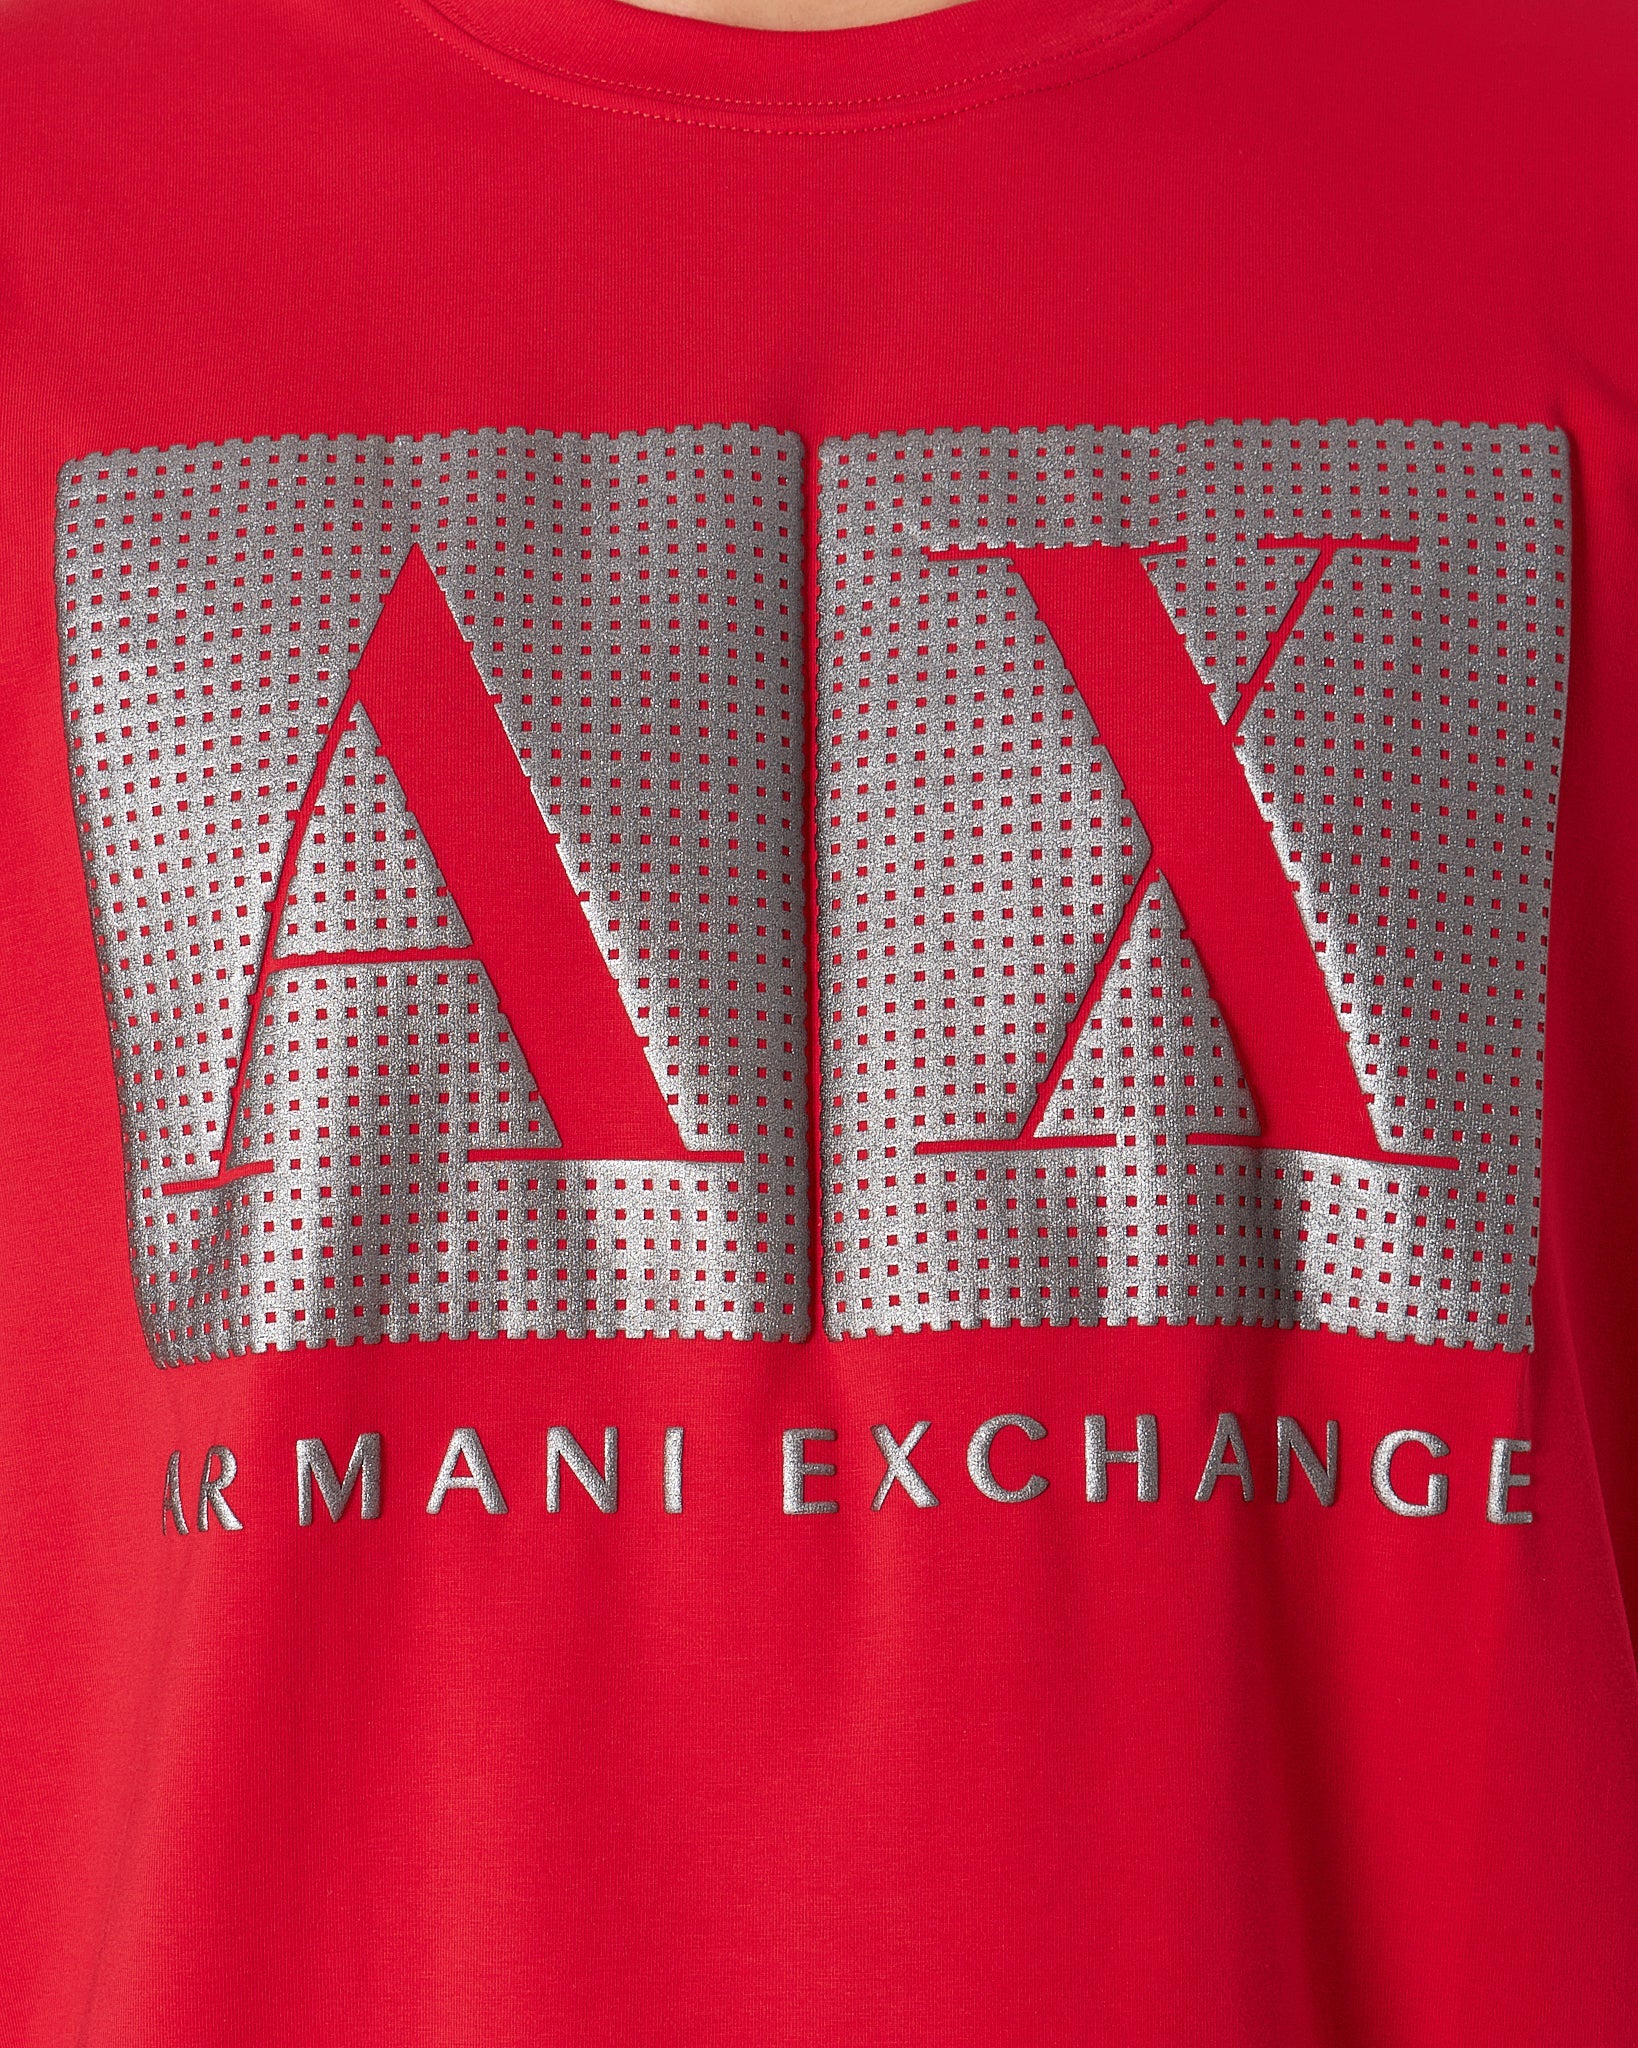 MOI OUTFIT-ARM Exchange Men Red T-Shirt 17.90